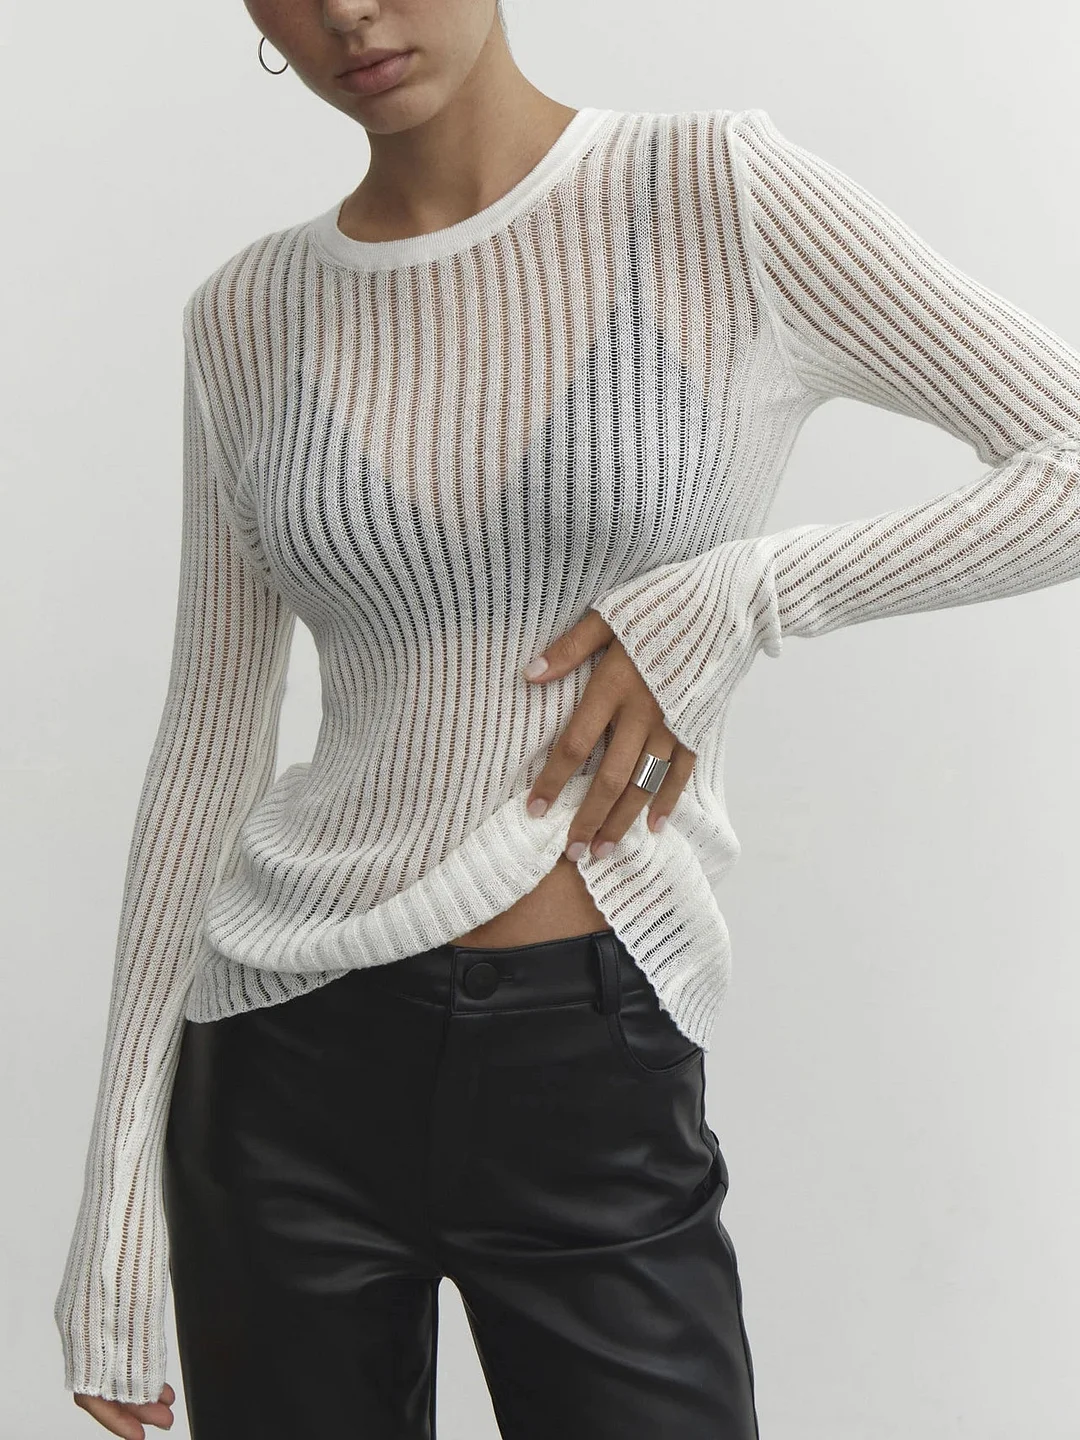 Huiketi White Ribbed Knit T-Shirts Ladies See-Through Rib Sweater Tops Spring New Outfits Pullover Long Sleeve Casual Top Tees